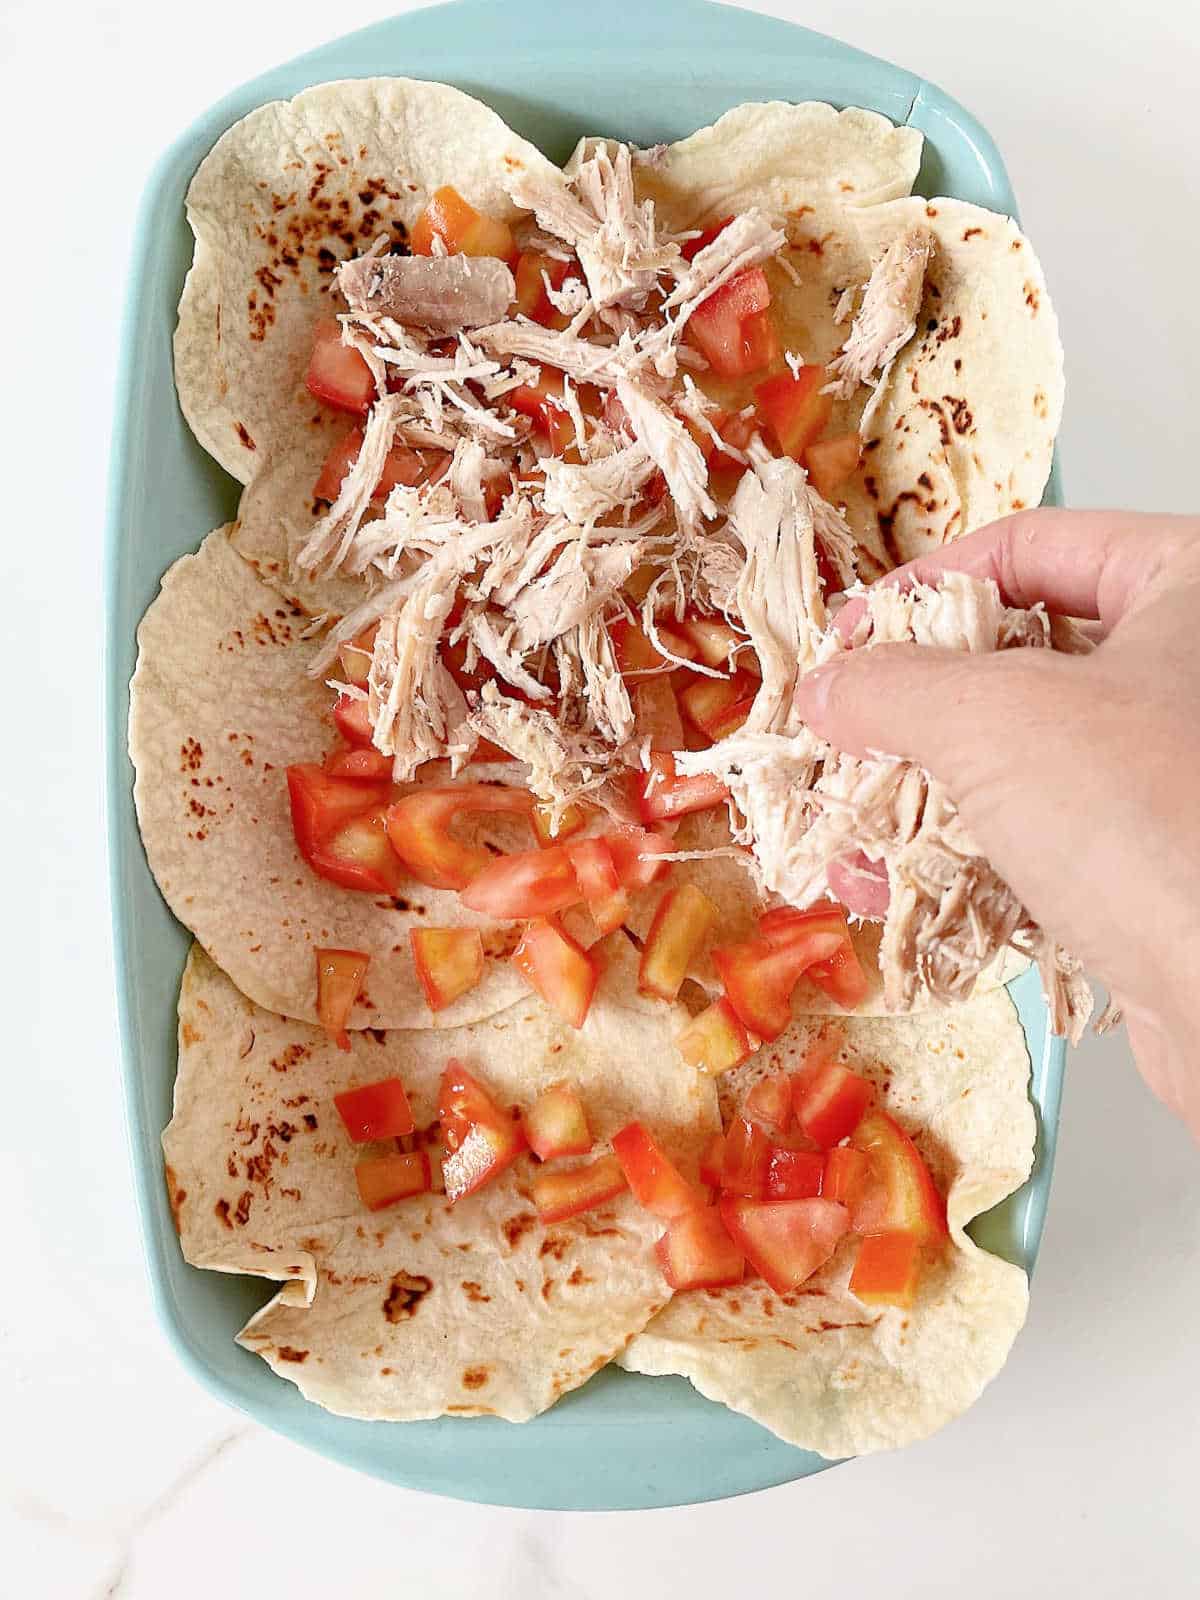 Hand adding chicken and tomatoes on a layer of tortillas in a rectangular blue baking dish on white marble surface. 